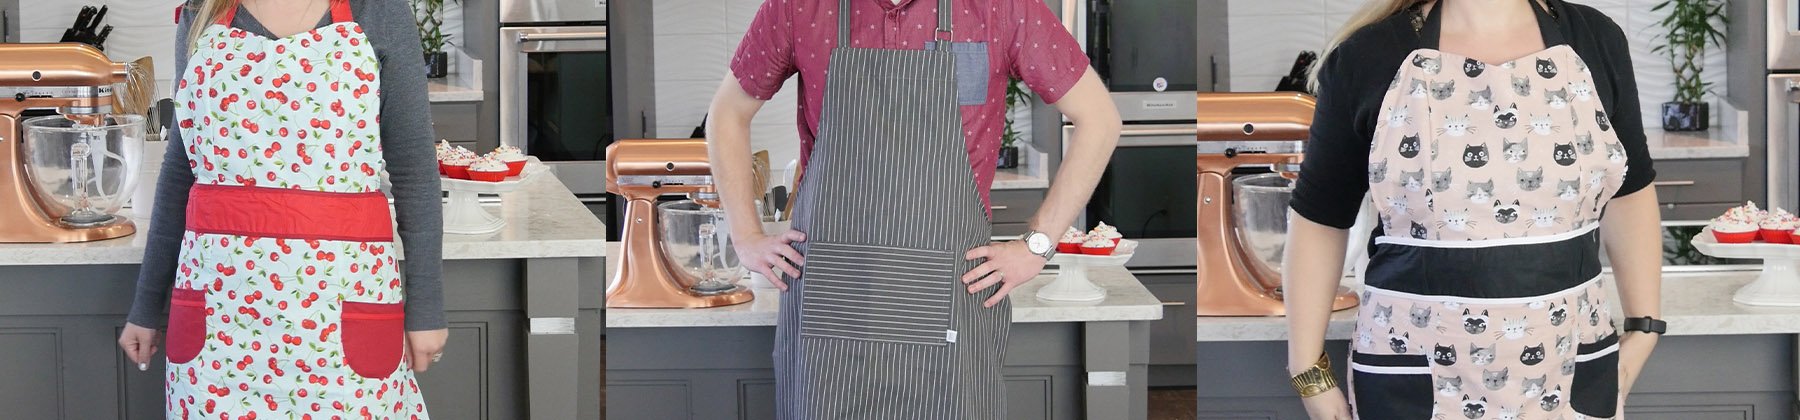 Photo of aprons.